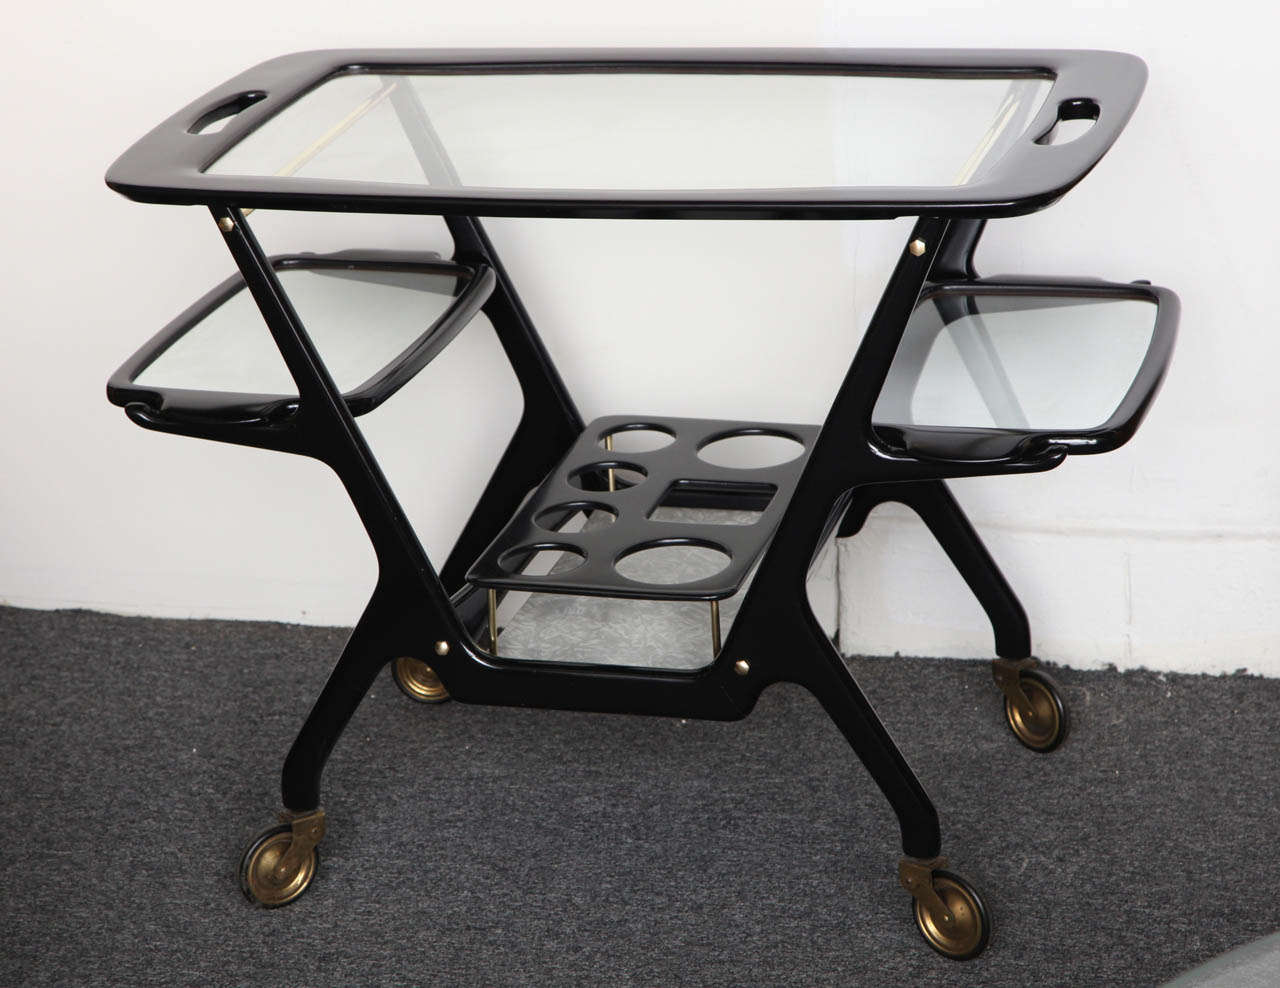 STYLISH BAR / SERVING CART DESIGNED By C.LACCA MADE IN MILAN 1955, UNUSUAL FORM THAT IT HAS 2 SMALL AND I LARGE SERVING TRAYS WITH RACK ON BOTTOM FOR BOTTLES, GREAT DESIGN.